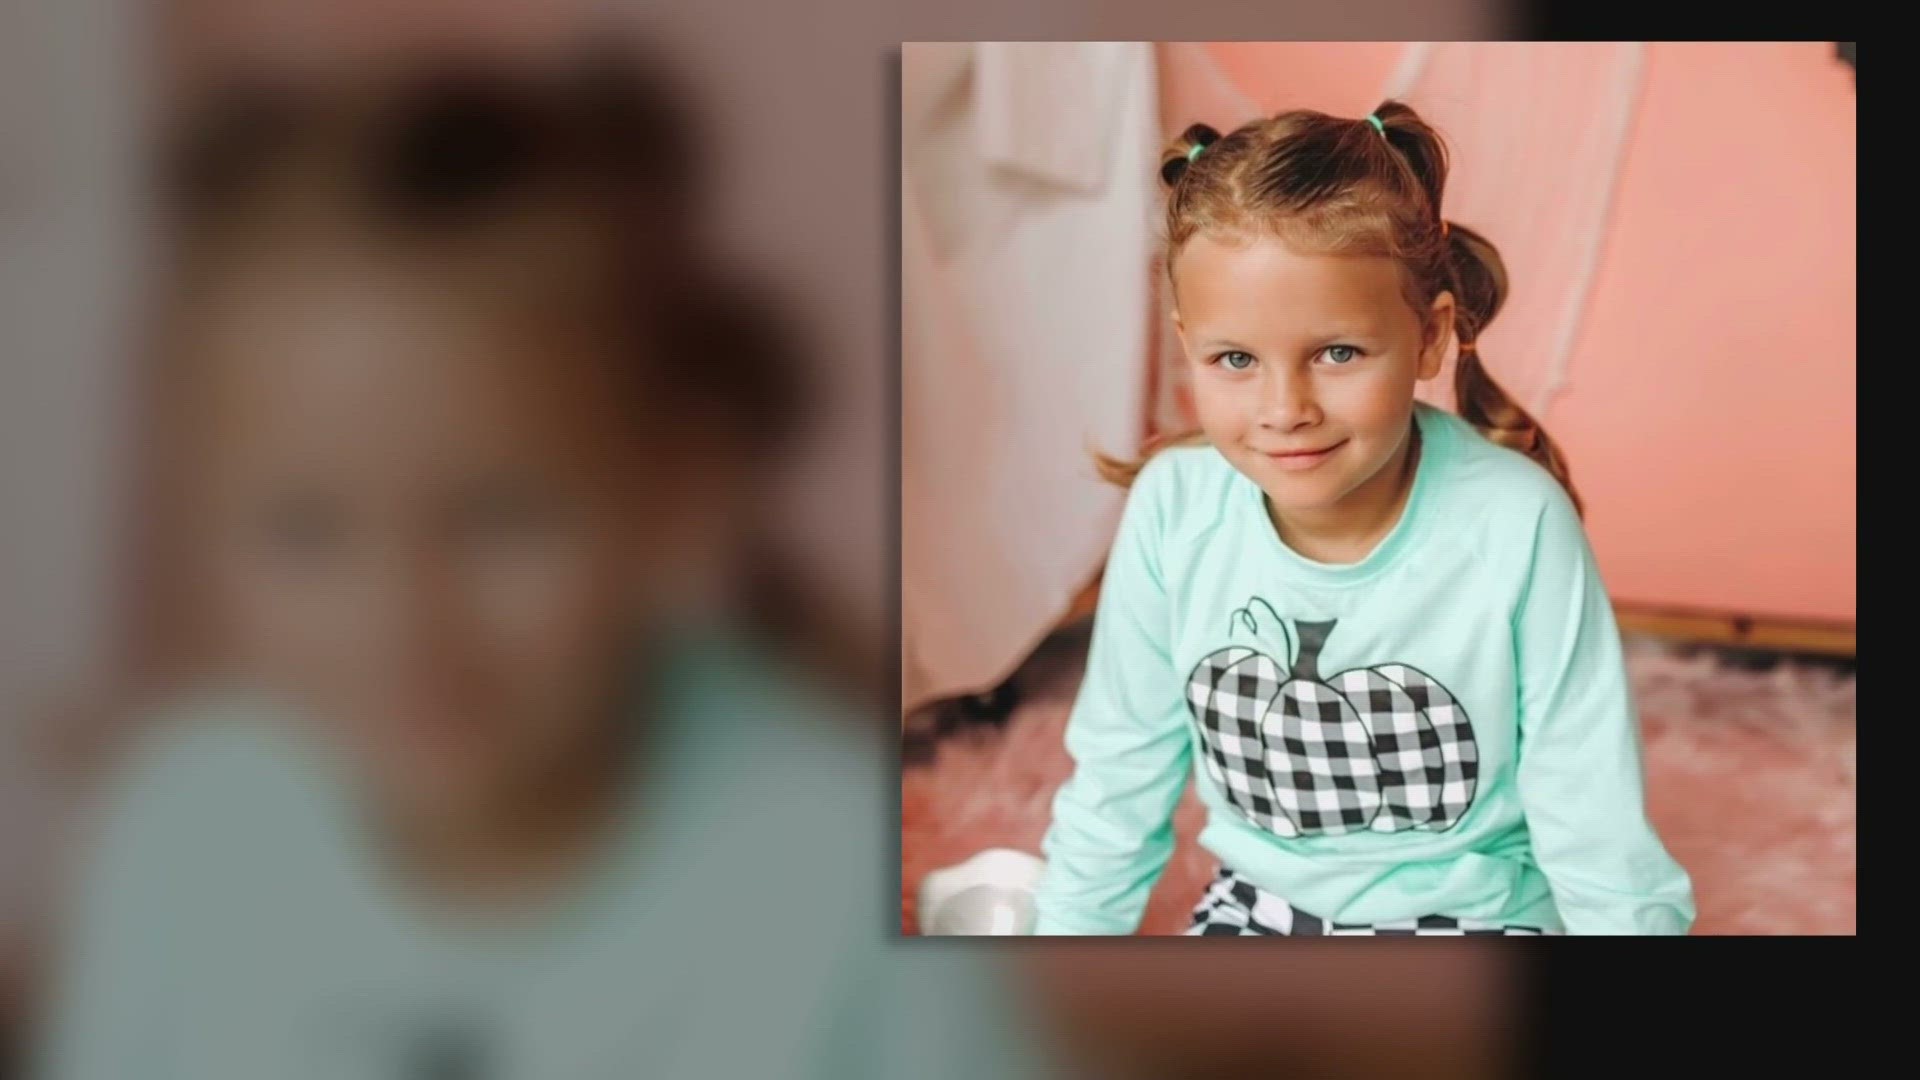 An AMBER Alert wasn't issued for Athena until nearly a day after she was last seen. At the time, the case didn't fully meet AMBER Alert criteria.